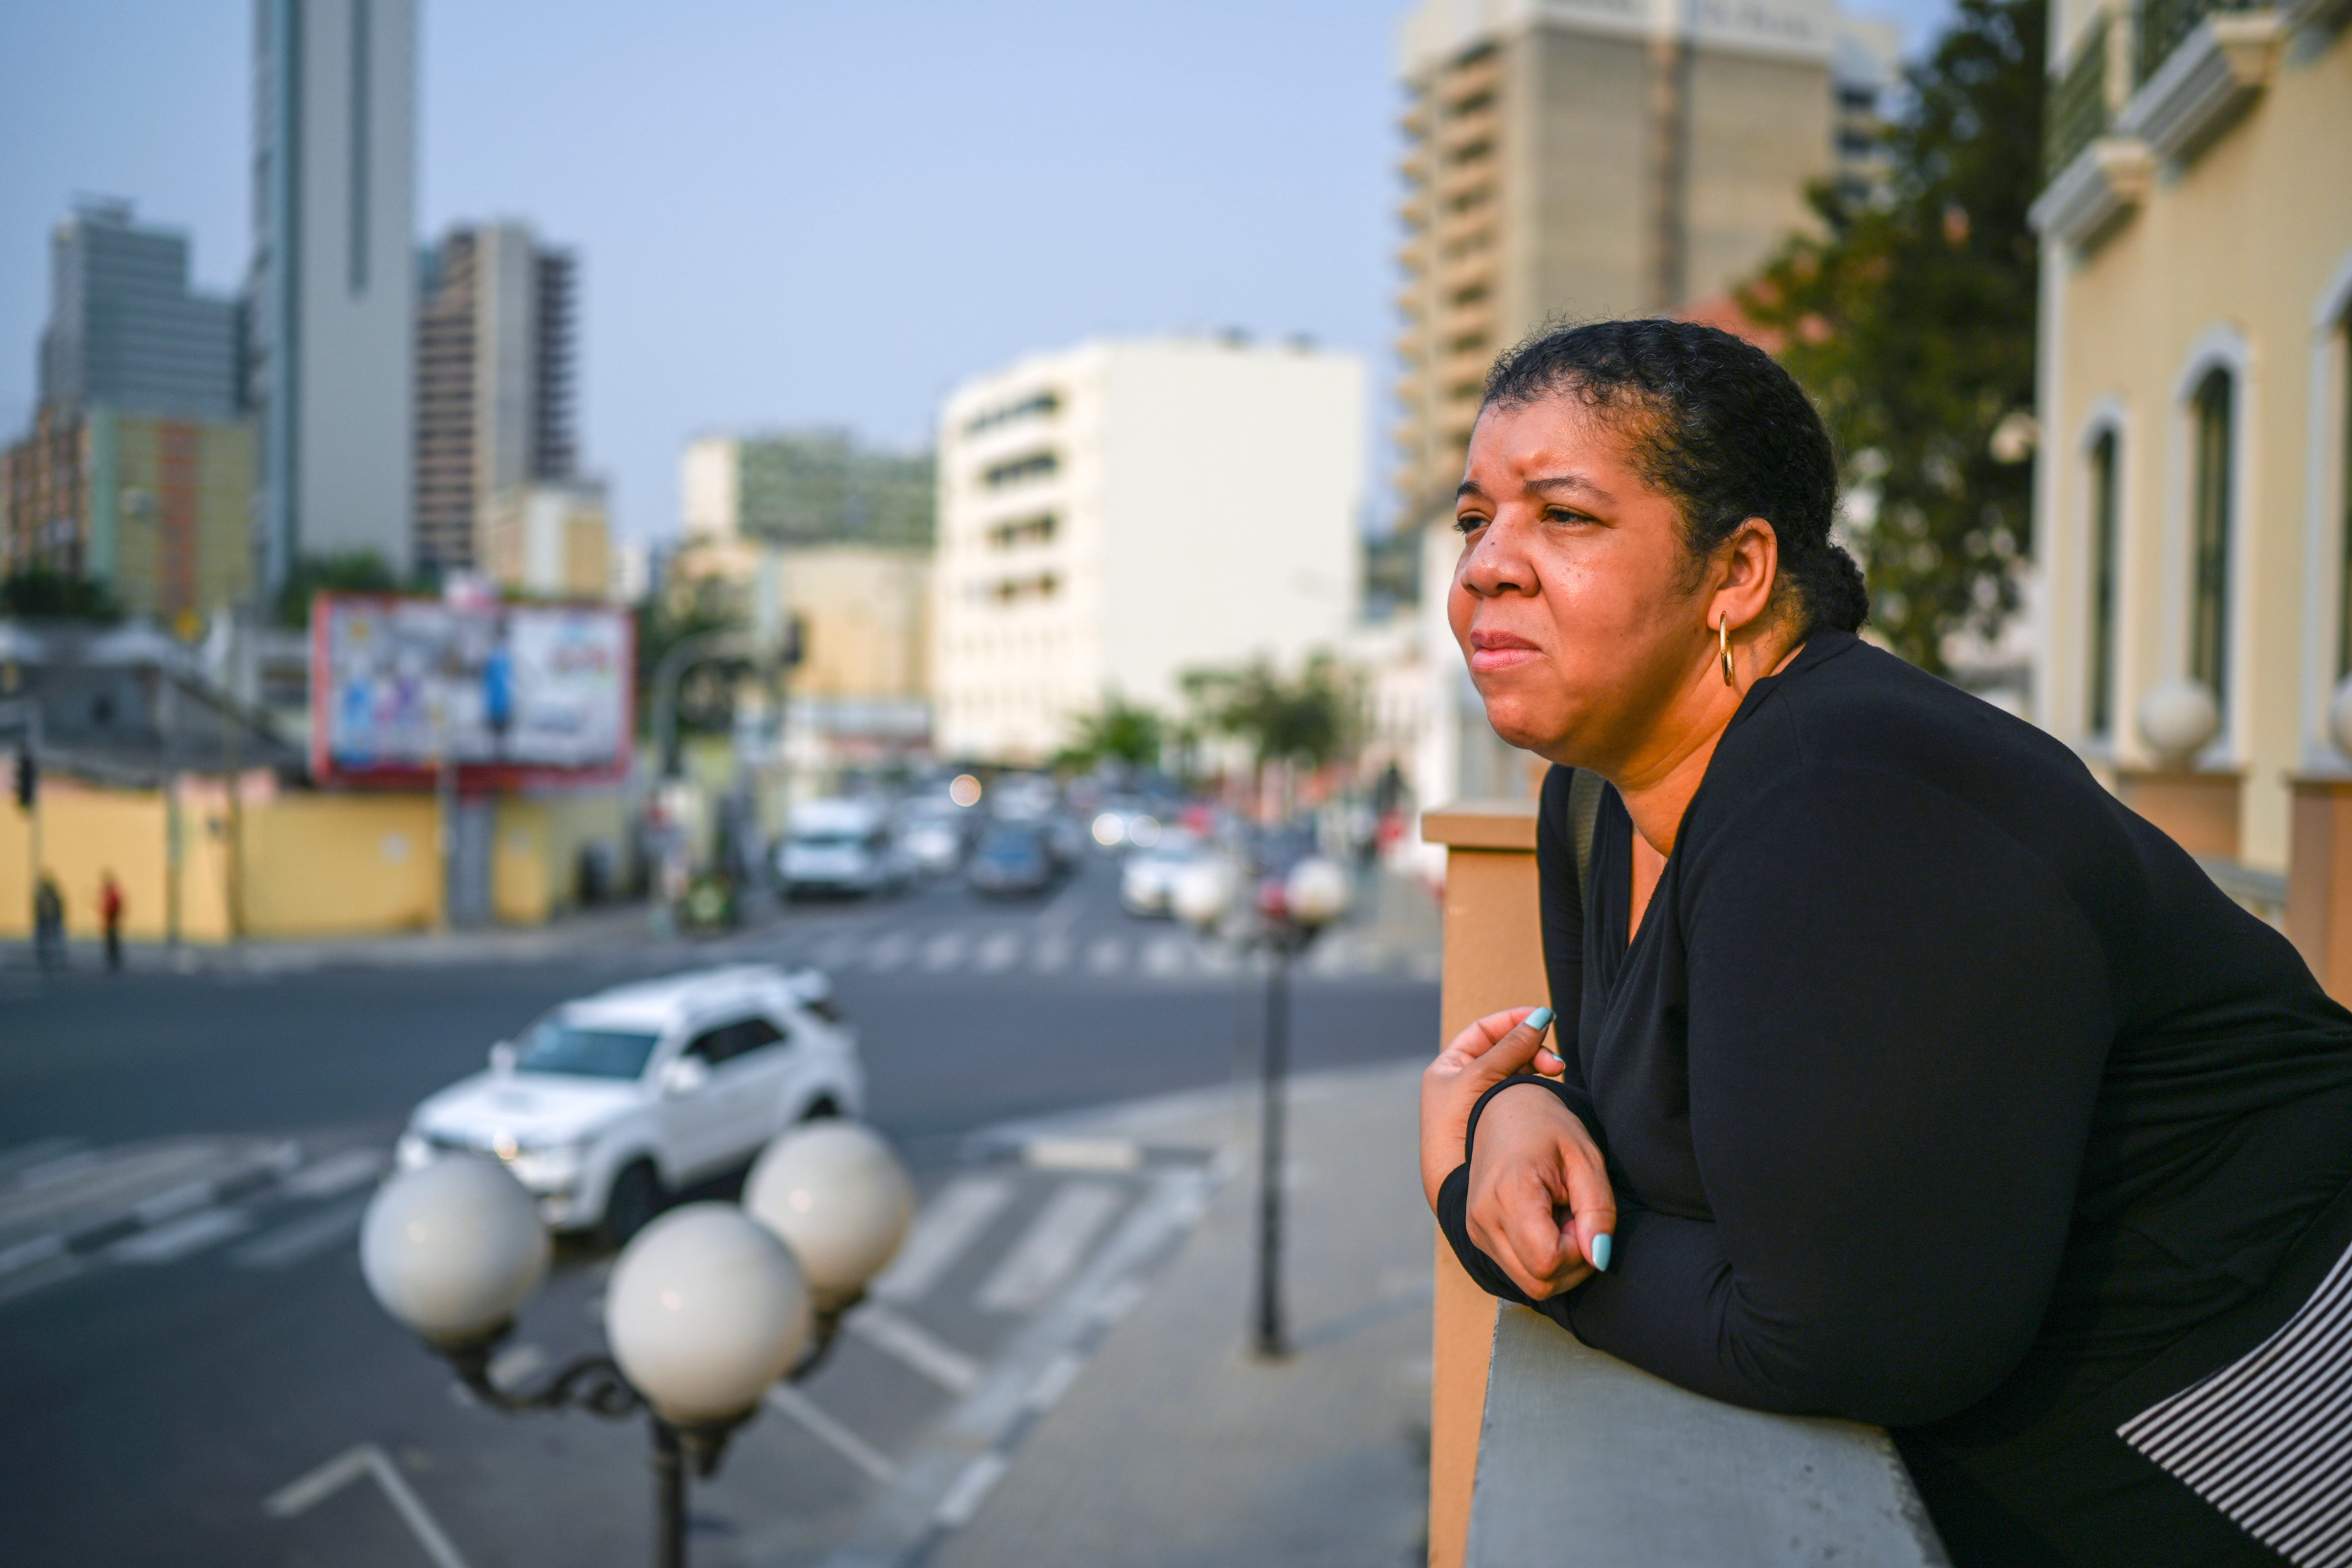 Nichelle Smith stands outside the palace of colonial-era female slaveholder Dona Ana Joaquina in downtown Luanda. Smith edits USA TODAY's Black History Month publication. Much of her research was used to take the reporting team to Angola and the origins of slavery.